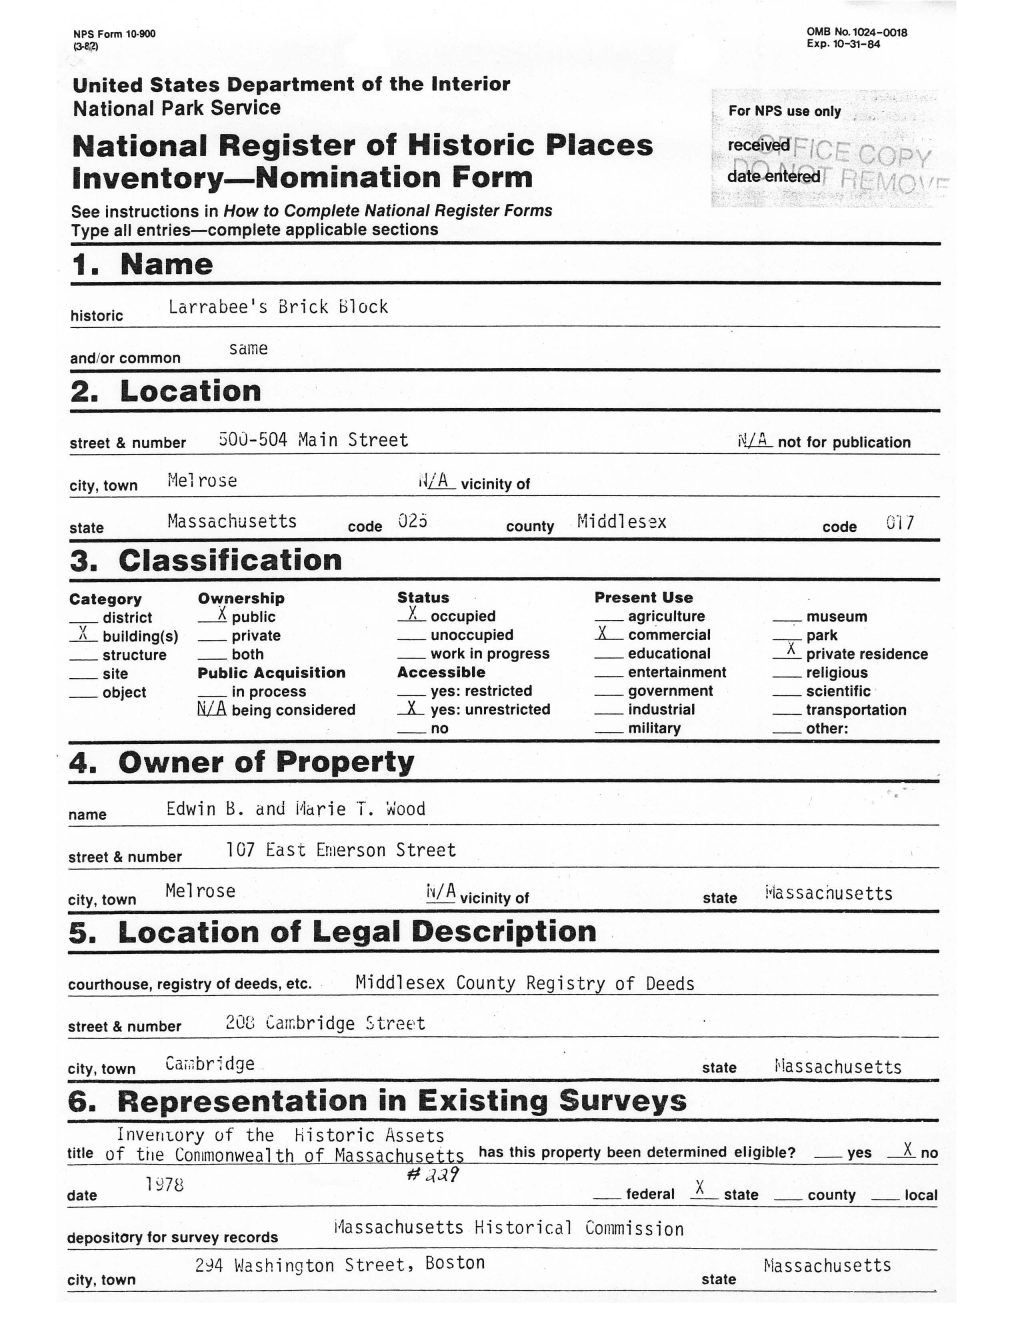 2. Location 3. Classification 4. Owner of Property 5. Location of Legal Description 6. Representation in Existing Surveys Nation